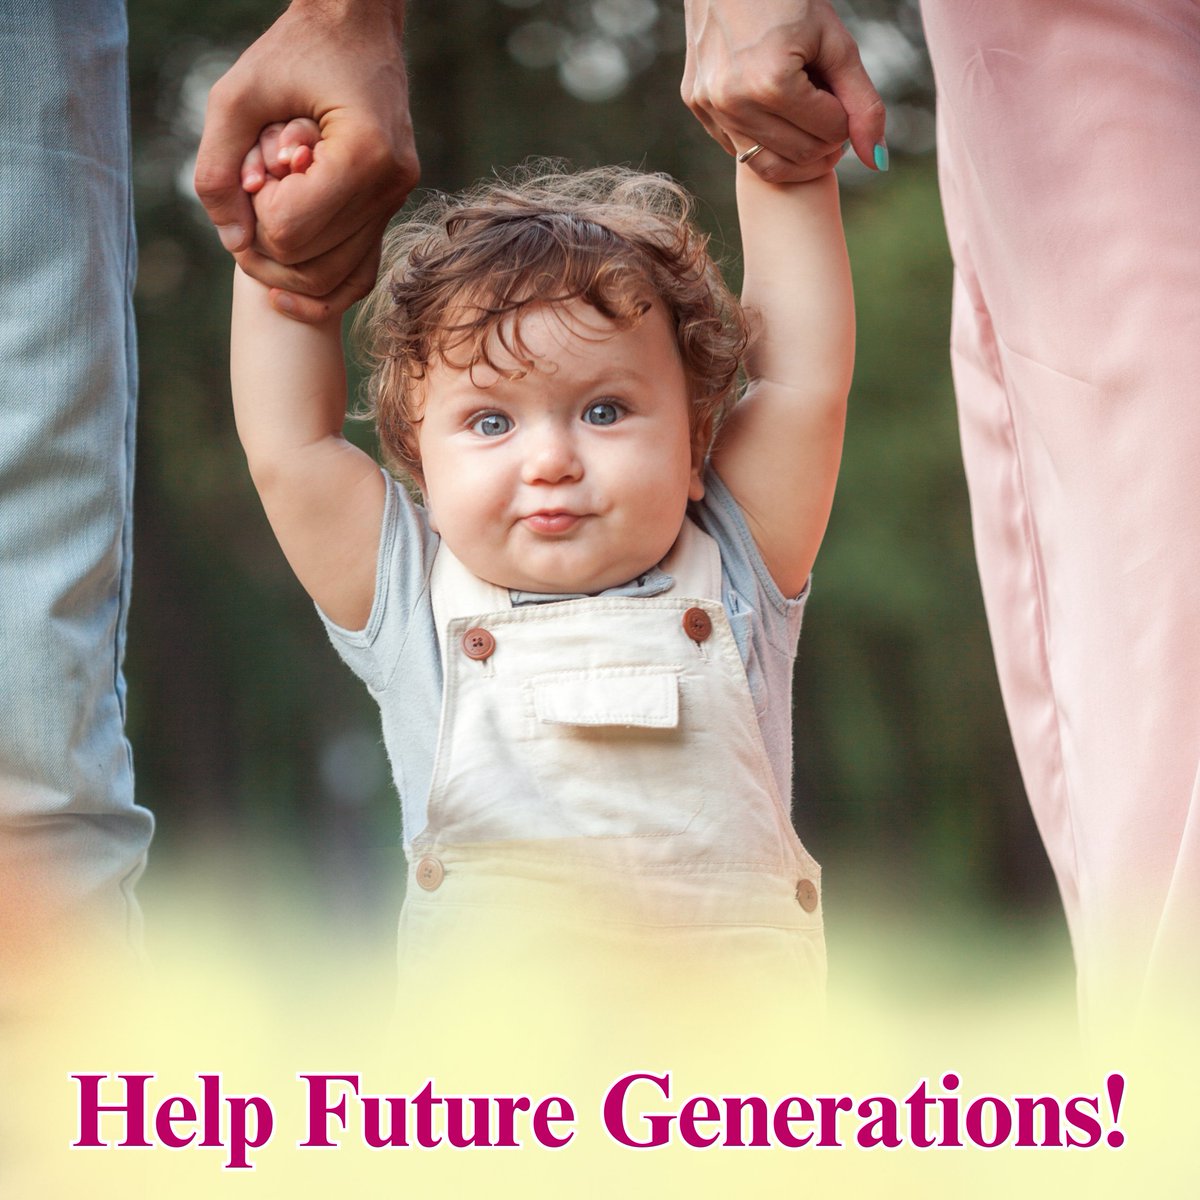 👋 Can you help future generations? 🌟 By taking part in health research projects, you can help researchers discover tomorrow’s medicines. 😃 Improve healthcare for future generations now. ✅ Sign up at registerforshare.org #Scotland #HealthResearch